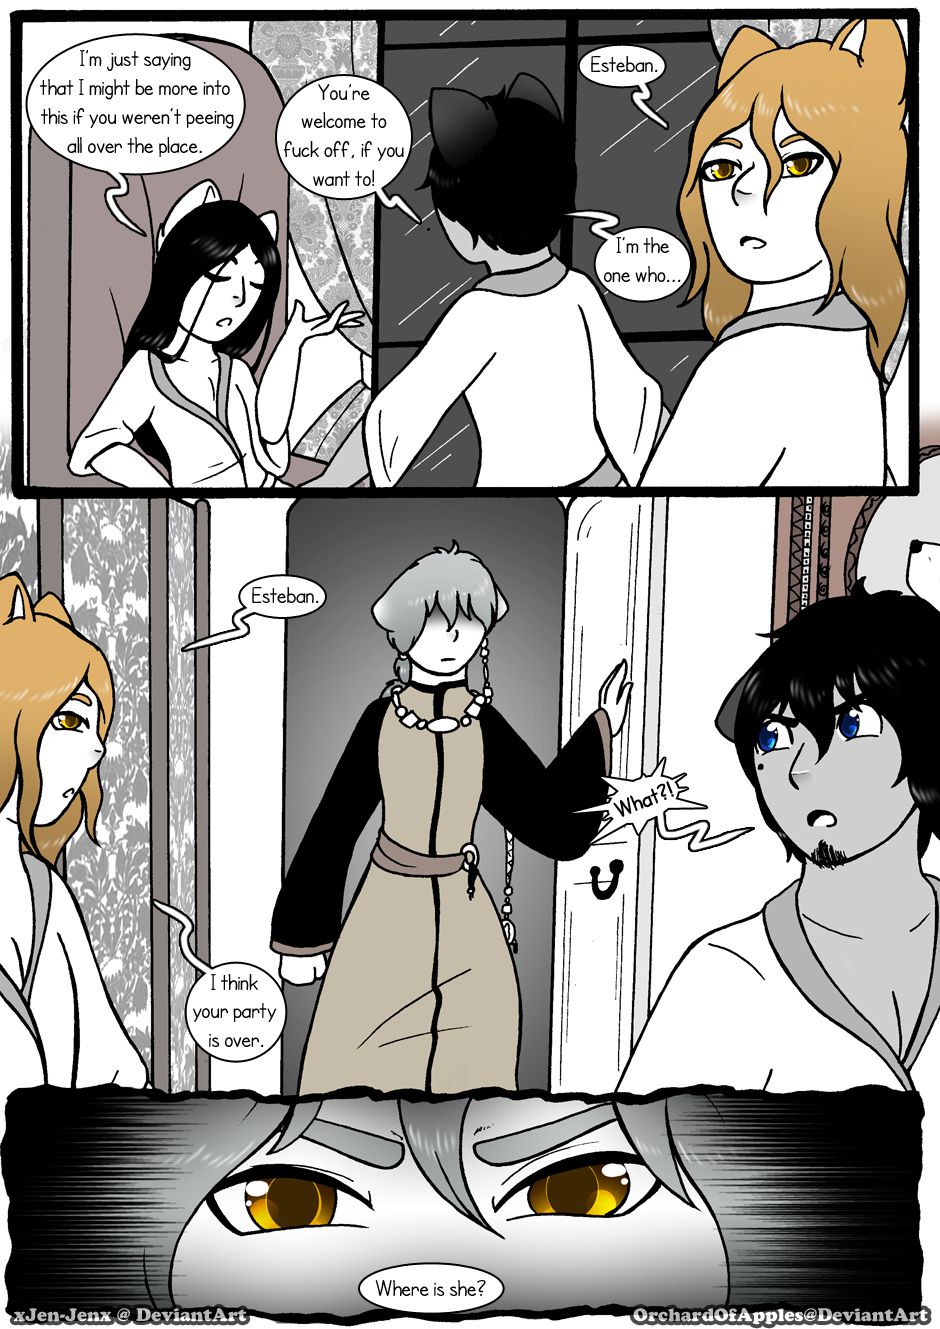 [Jeny-jen94] Between Kings and Queens [Ongoing] 168